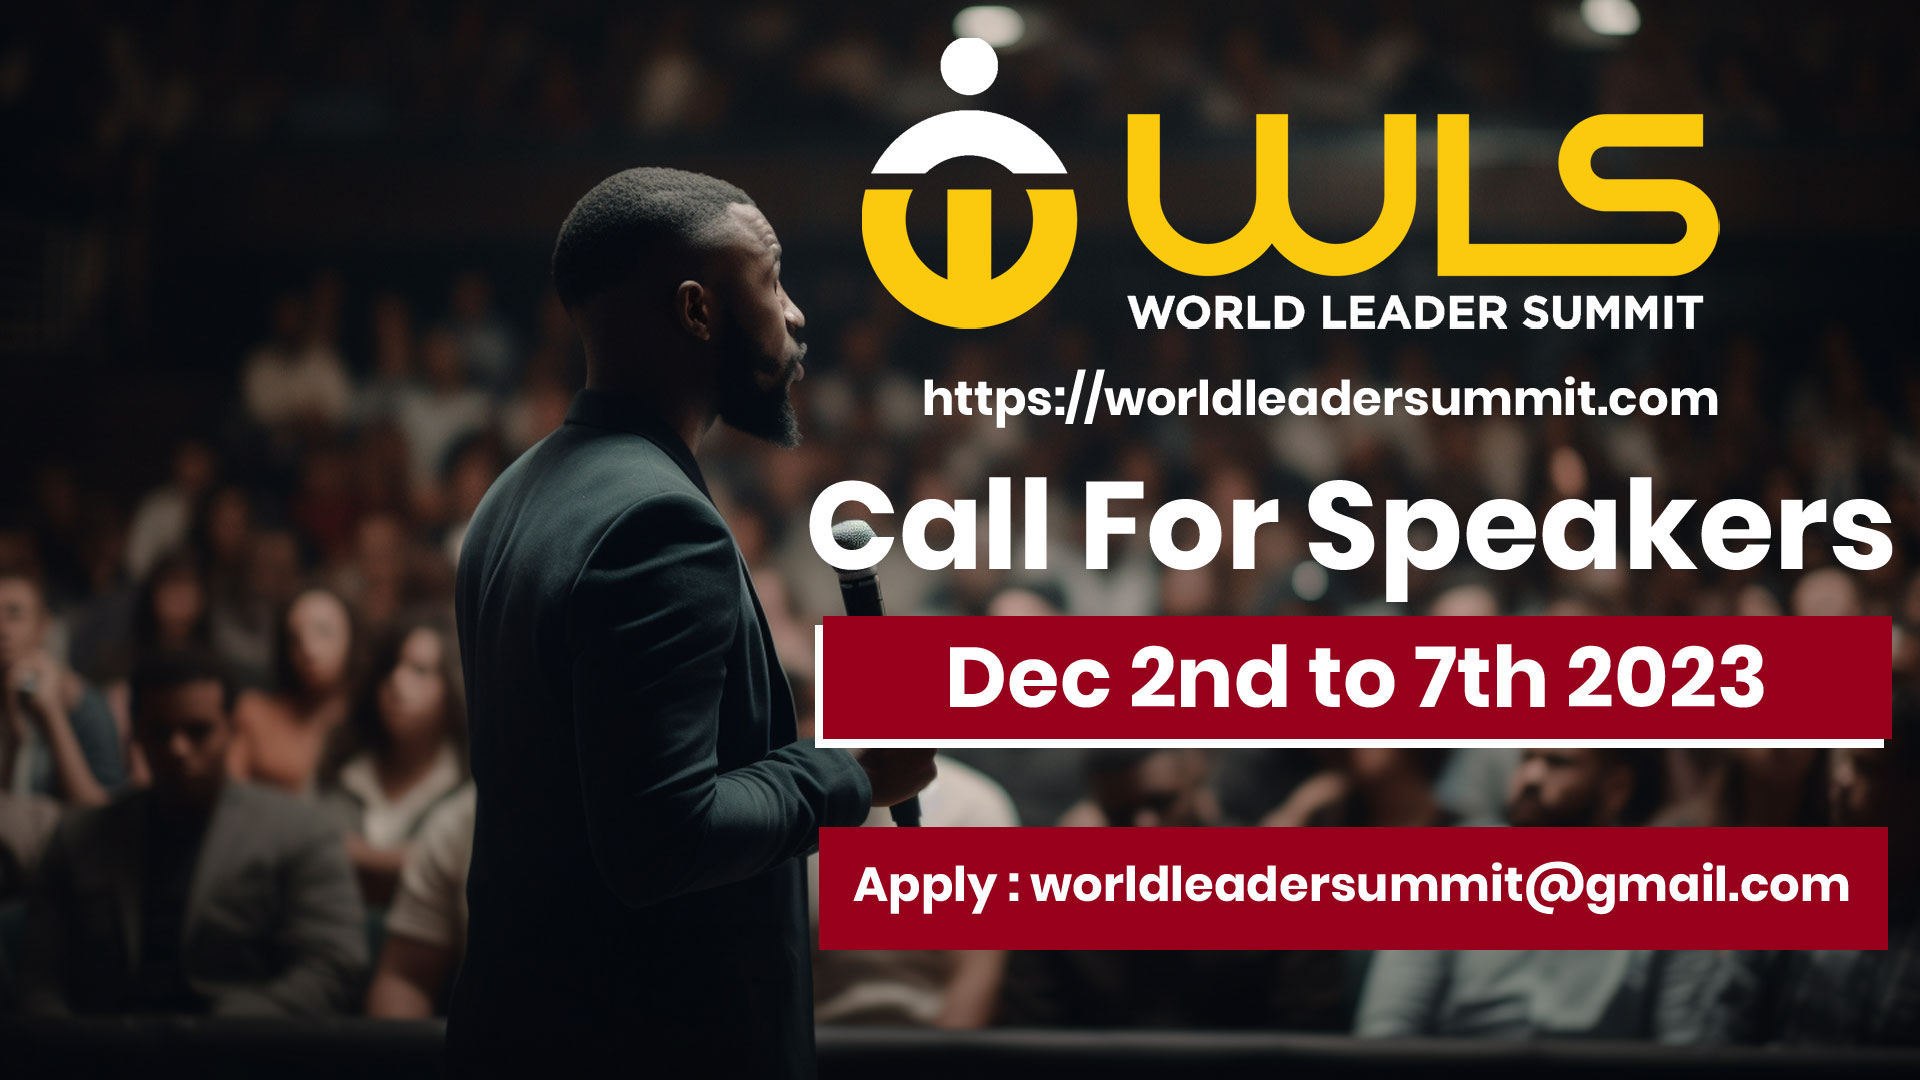 The Transformative Power of Attending and Speaking at the World Leader Summit 2023